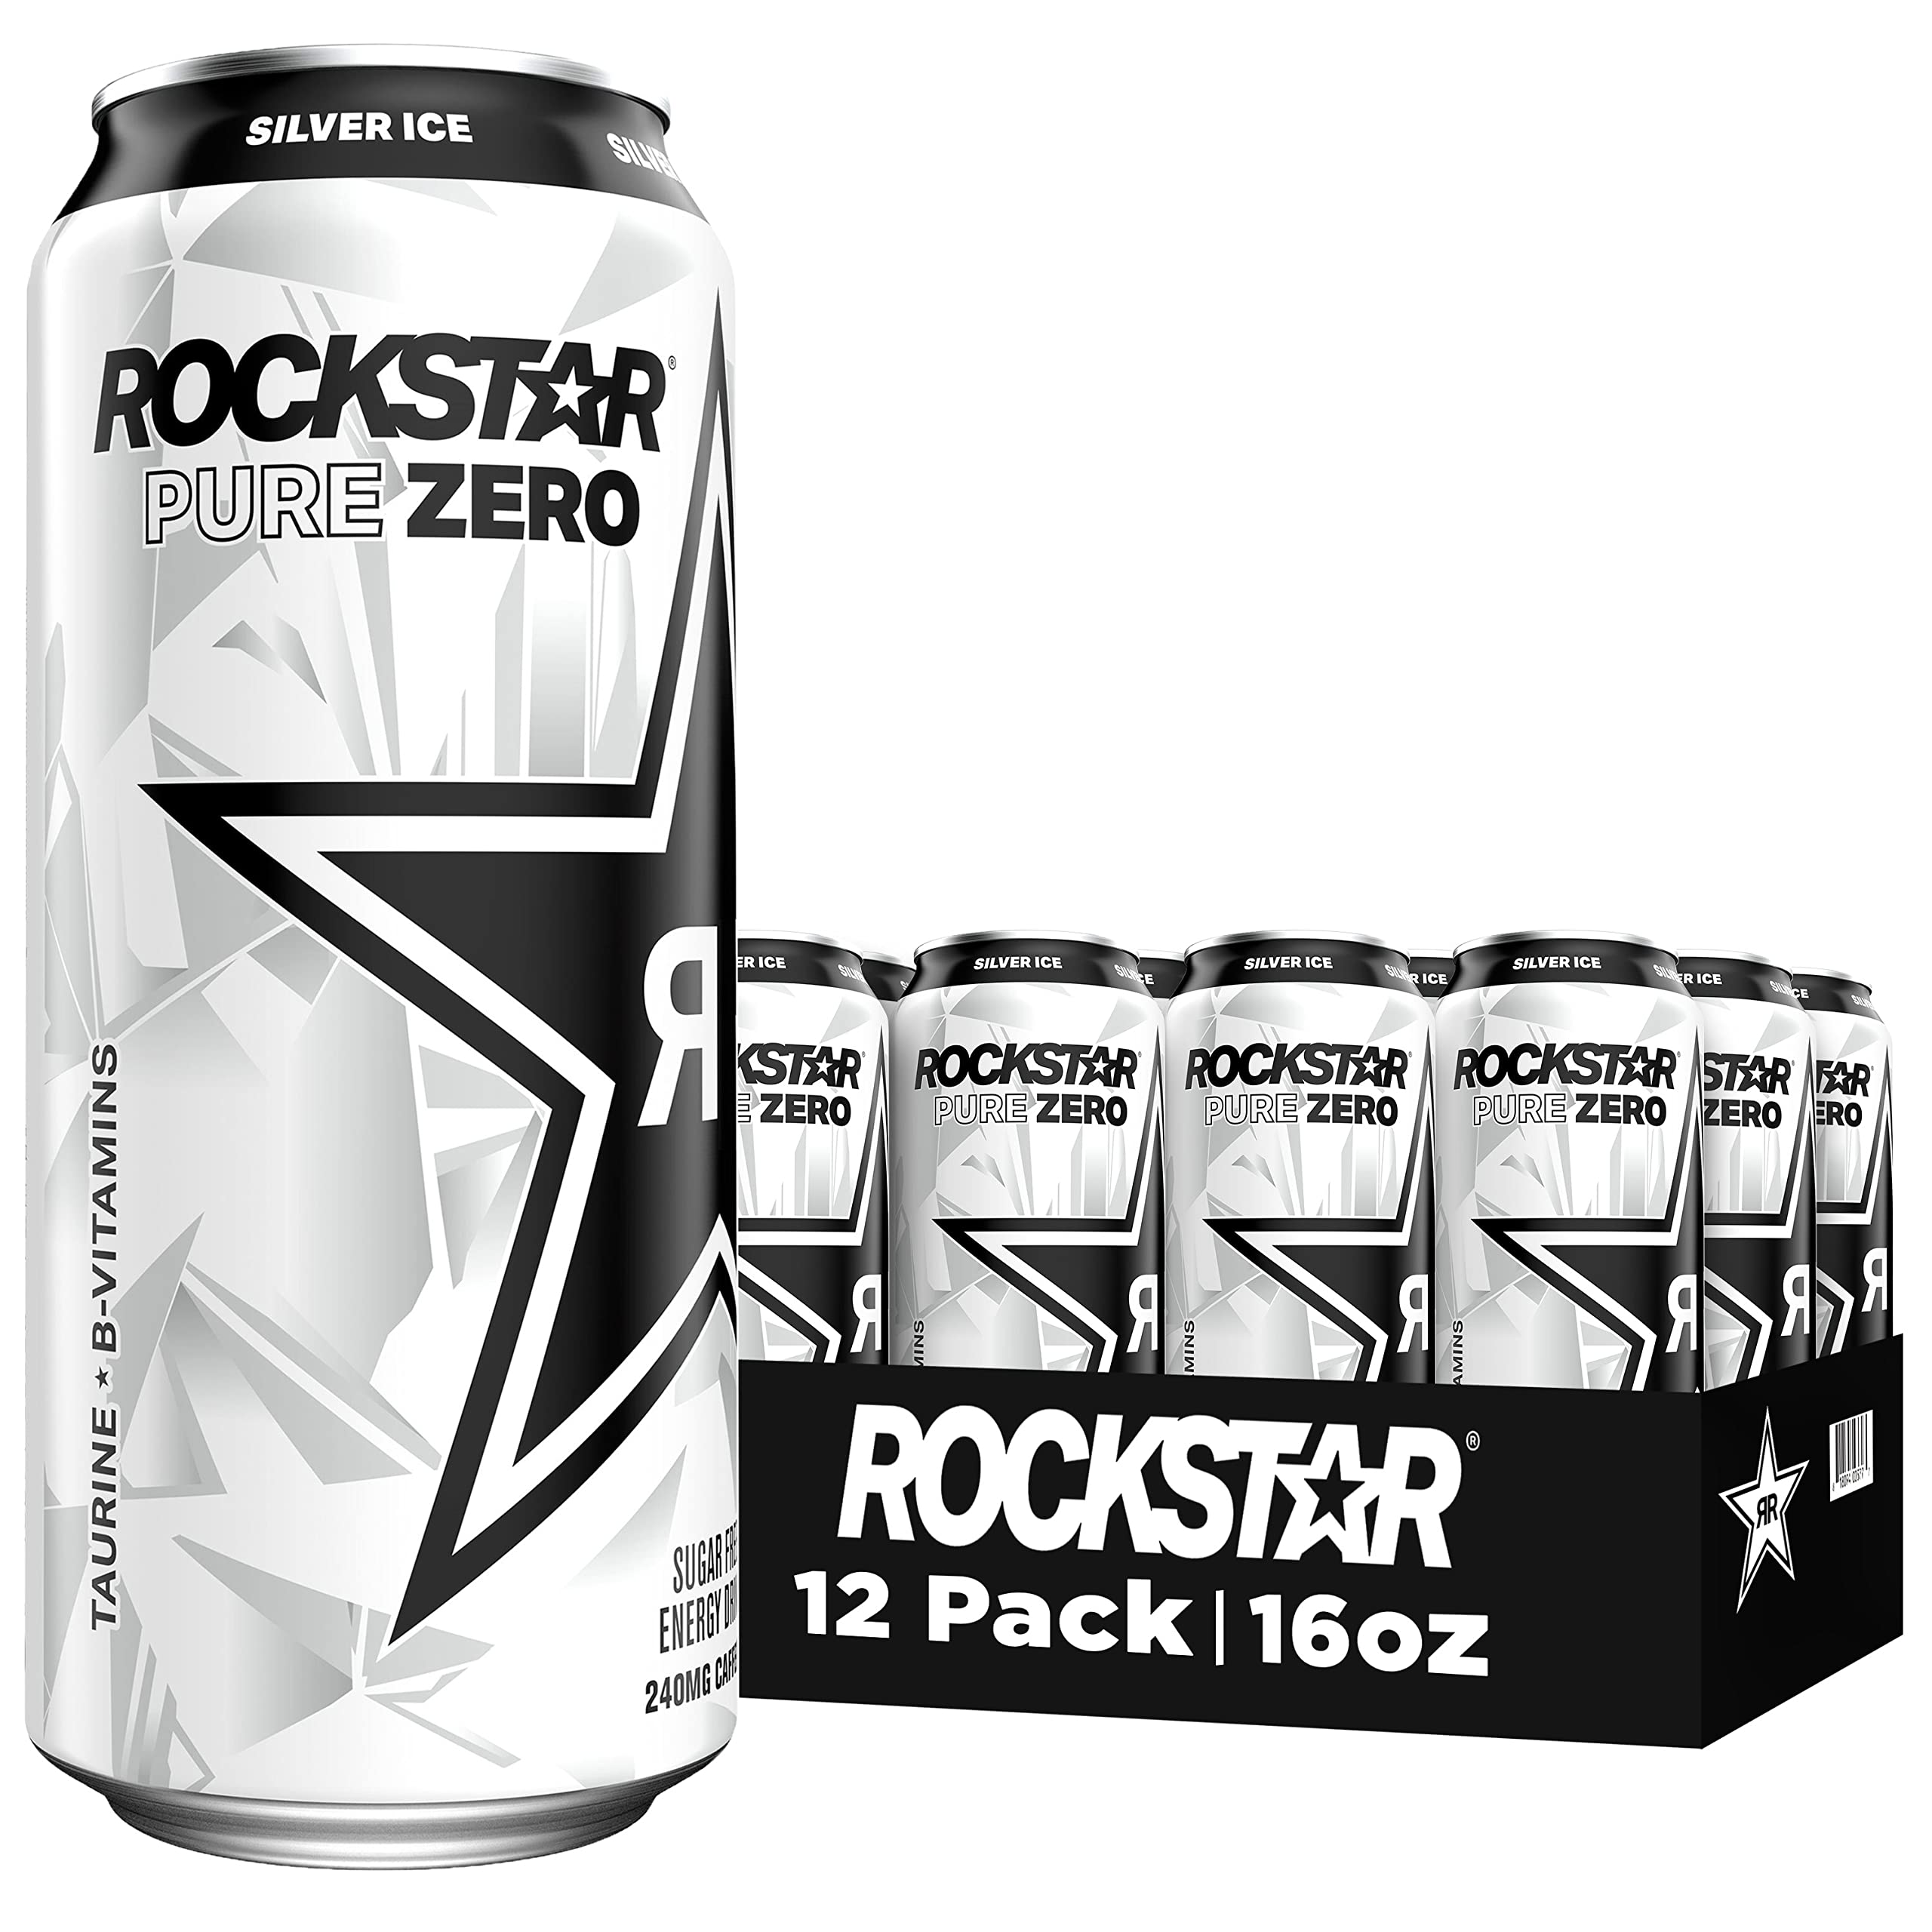 12-Pack 16-Oz Rockstar Pure Zero Energy Drink w/ Caffeine & Taurine (Silver Ice or Grape) $14.25 w/ S&S + Free Shipping w/ Prime or on $35+